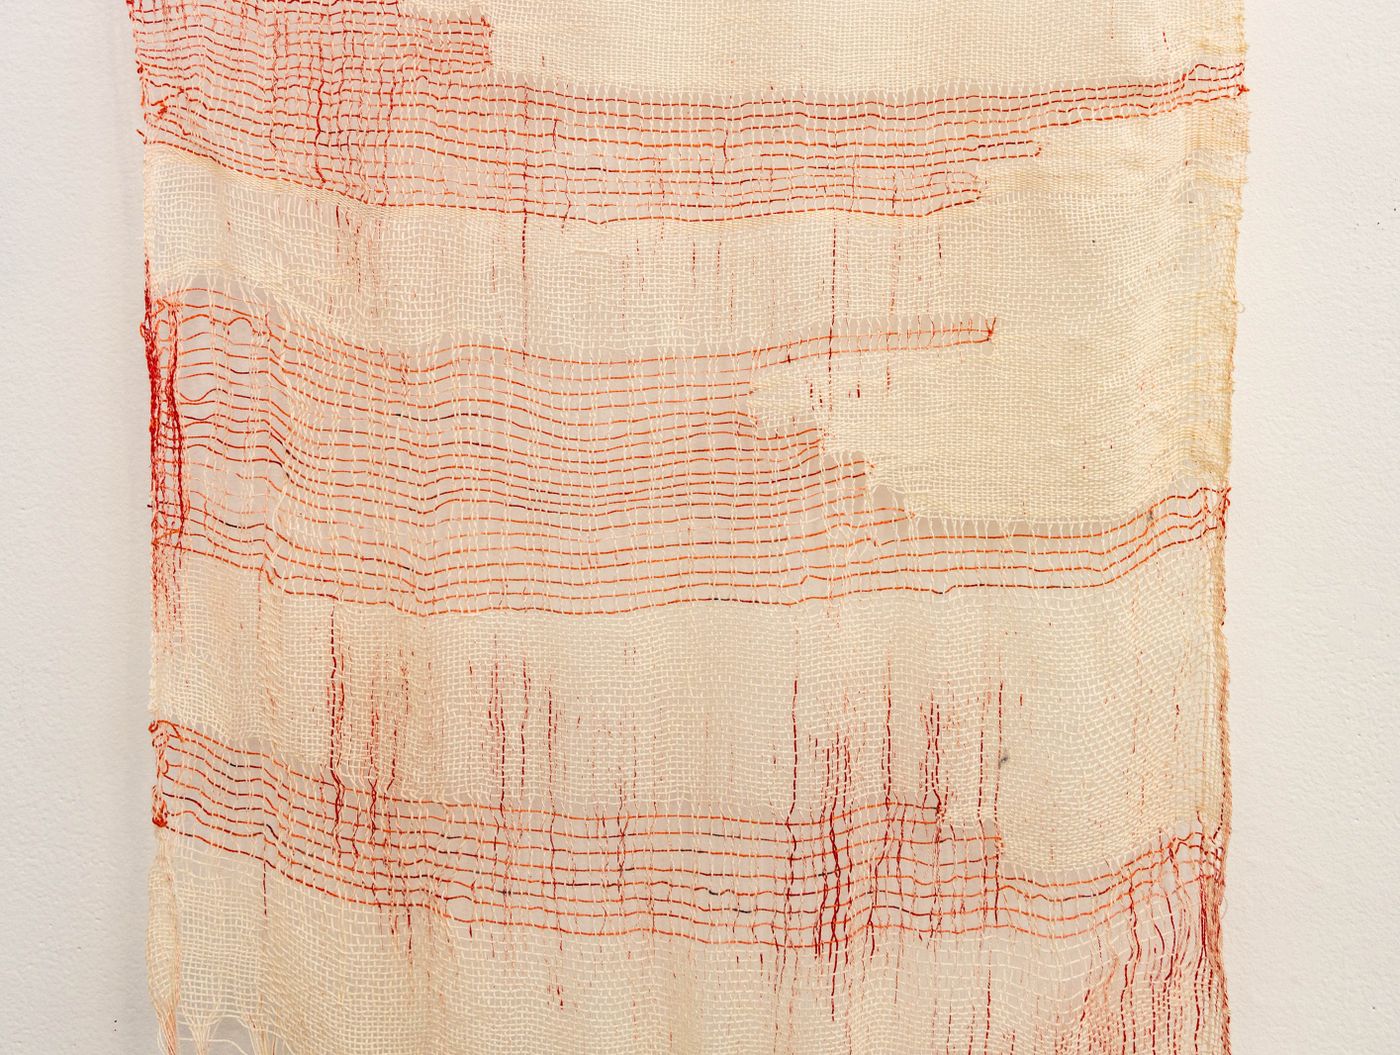 Redacted Stanzas (detail), 2022. Woven on rigid heddle loom with dye and leno-weave; 25 x 62 in. Photo: Meghan Olson.